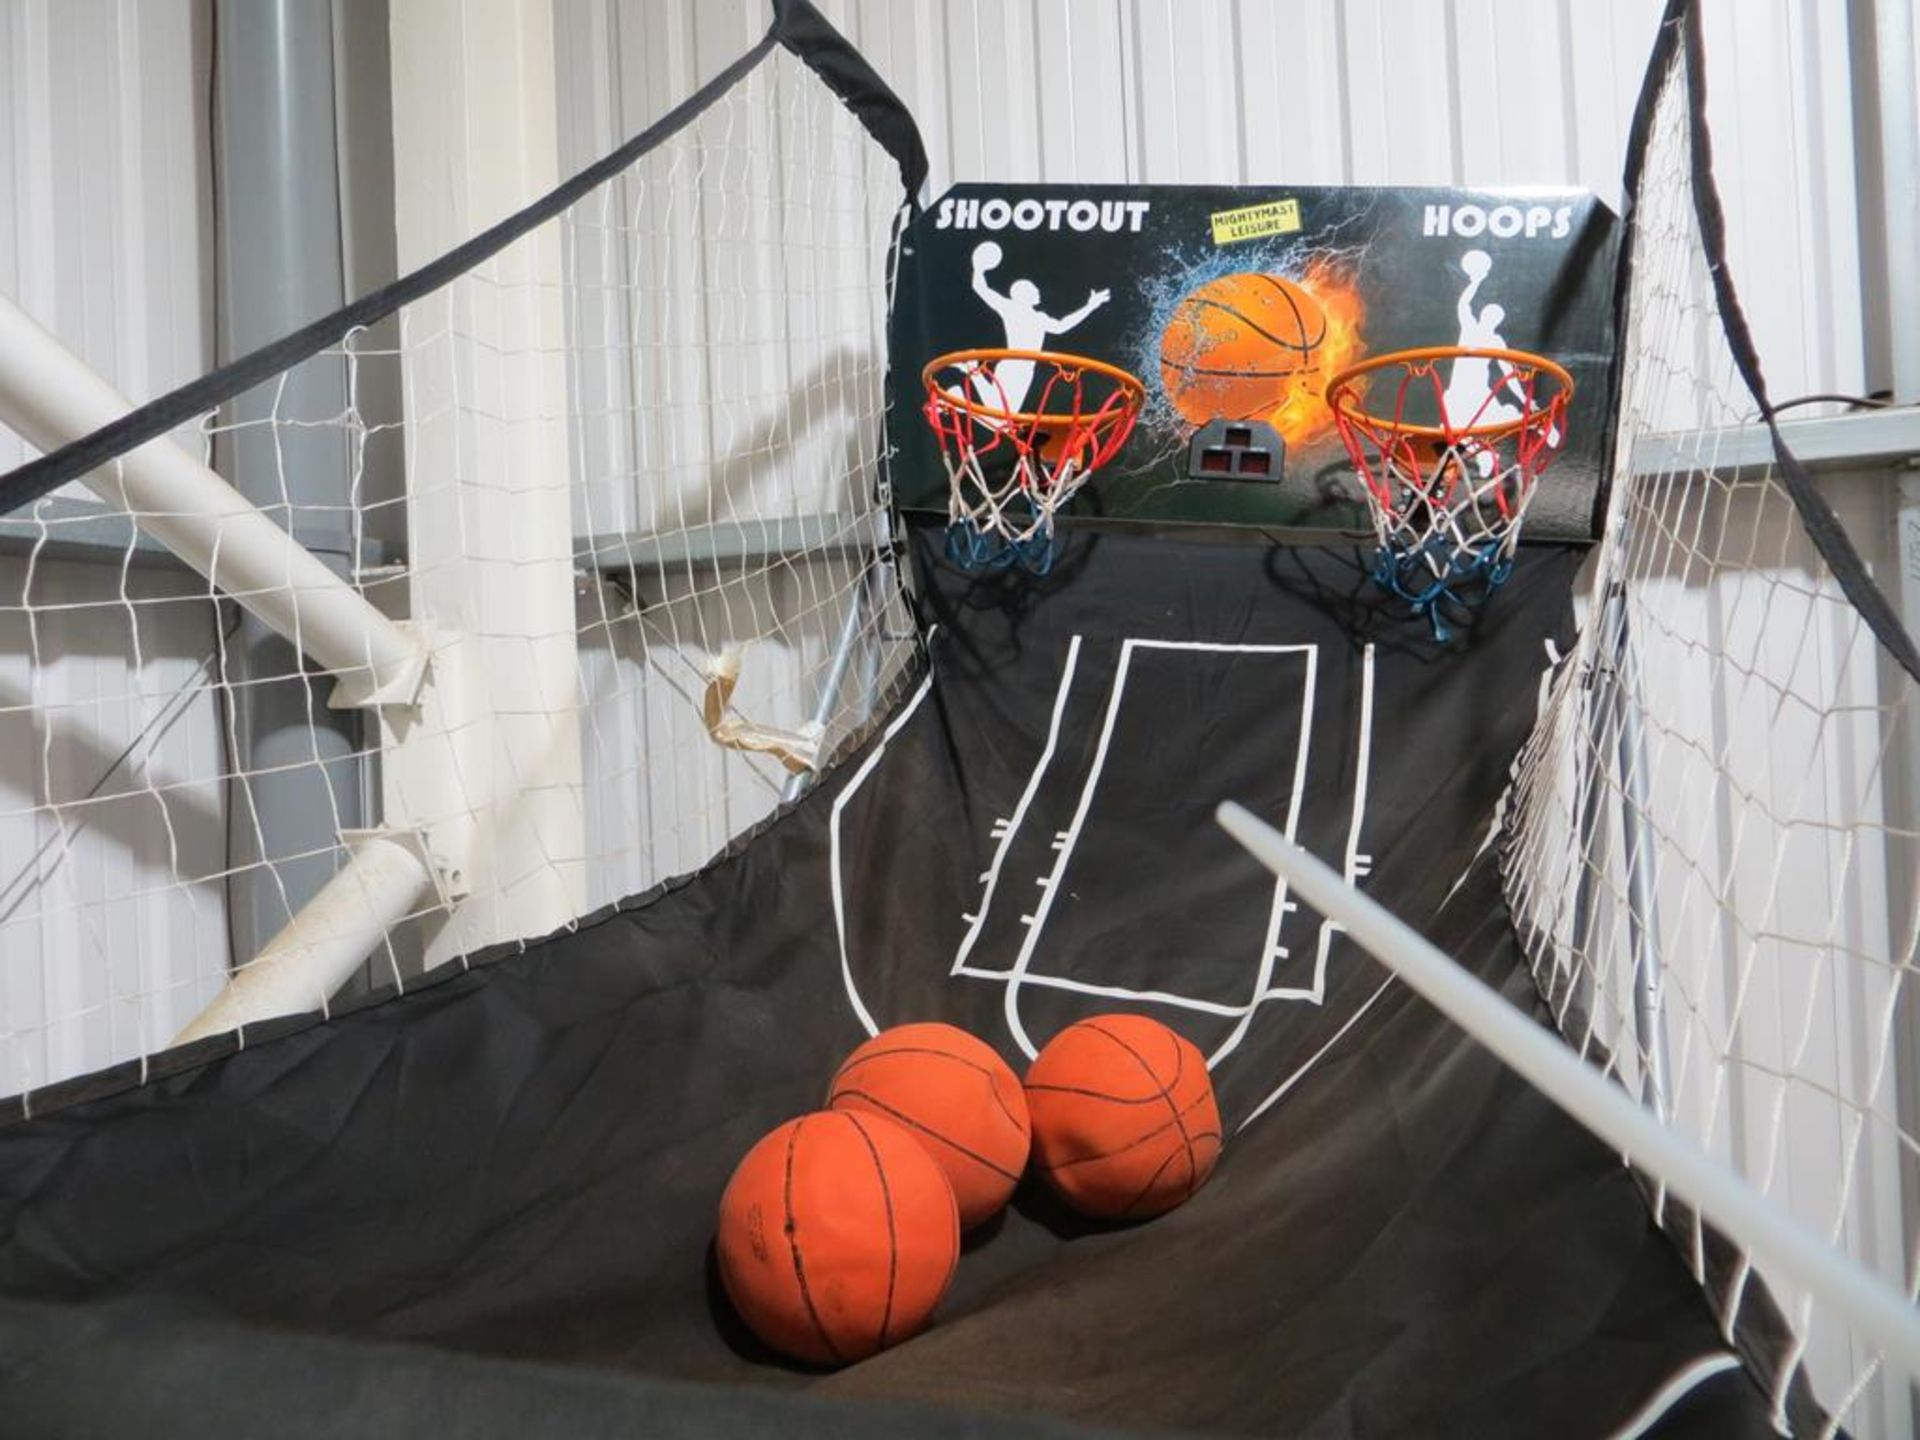 Shootout hoop electronic folding basketball game with 3 No basketballs : Unit 500, Eckersall Road,